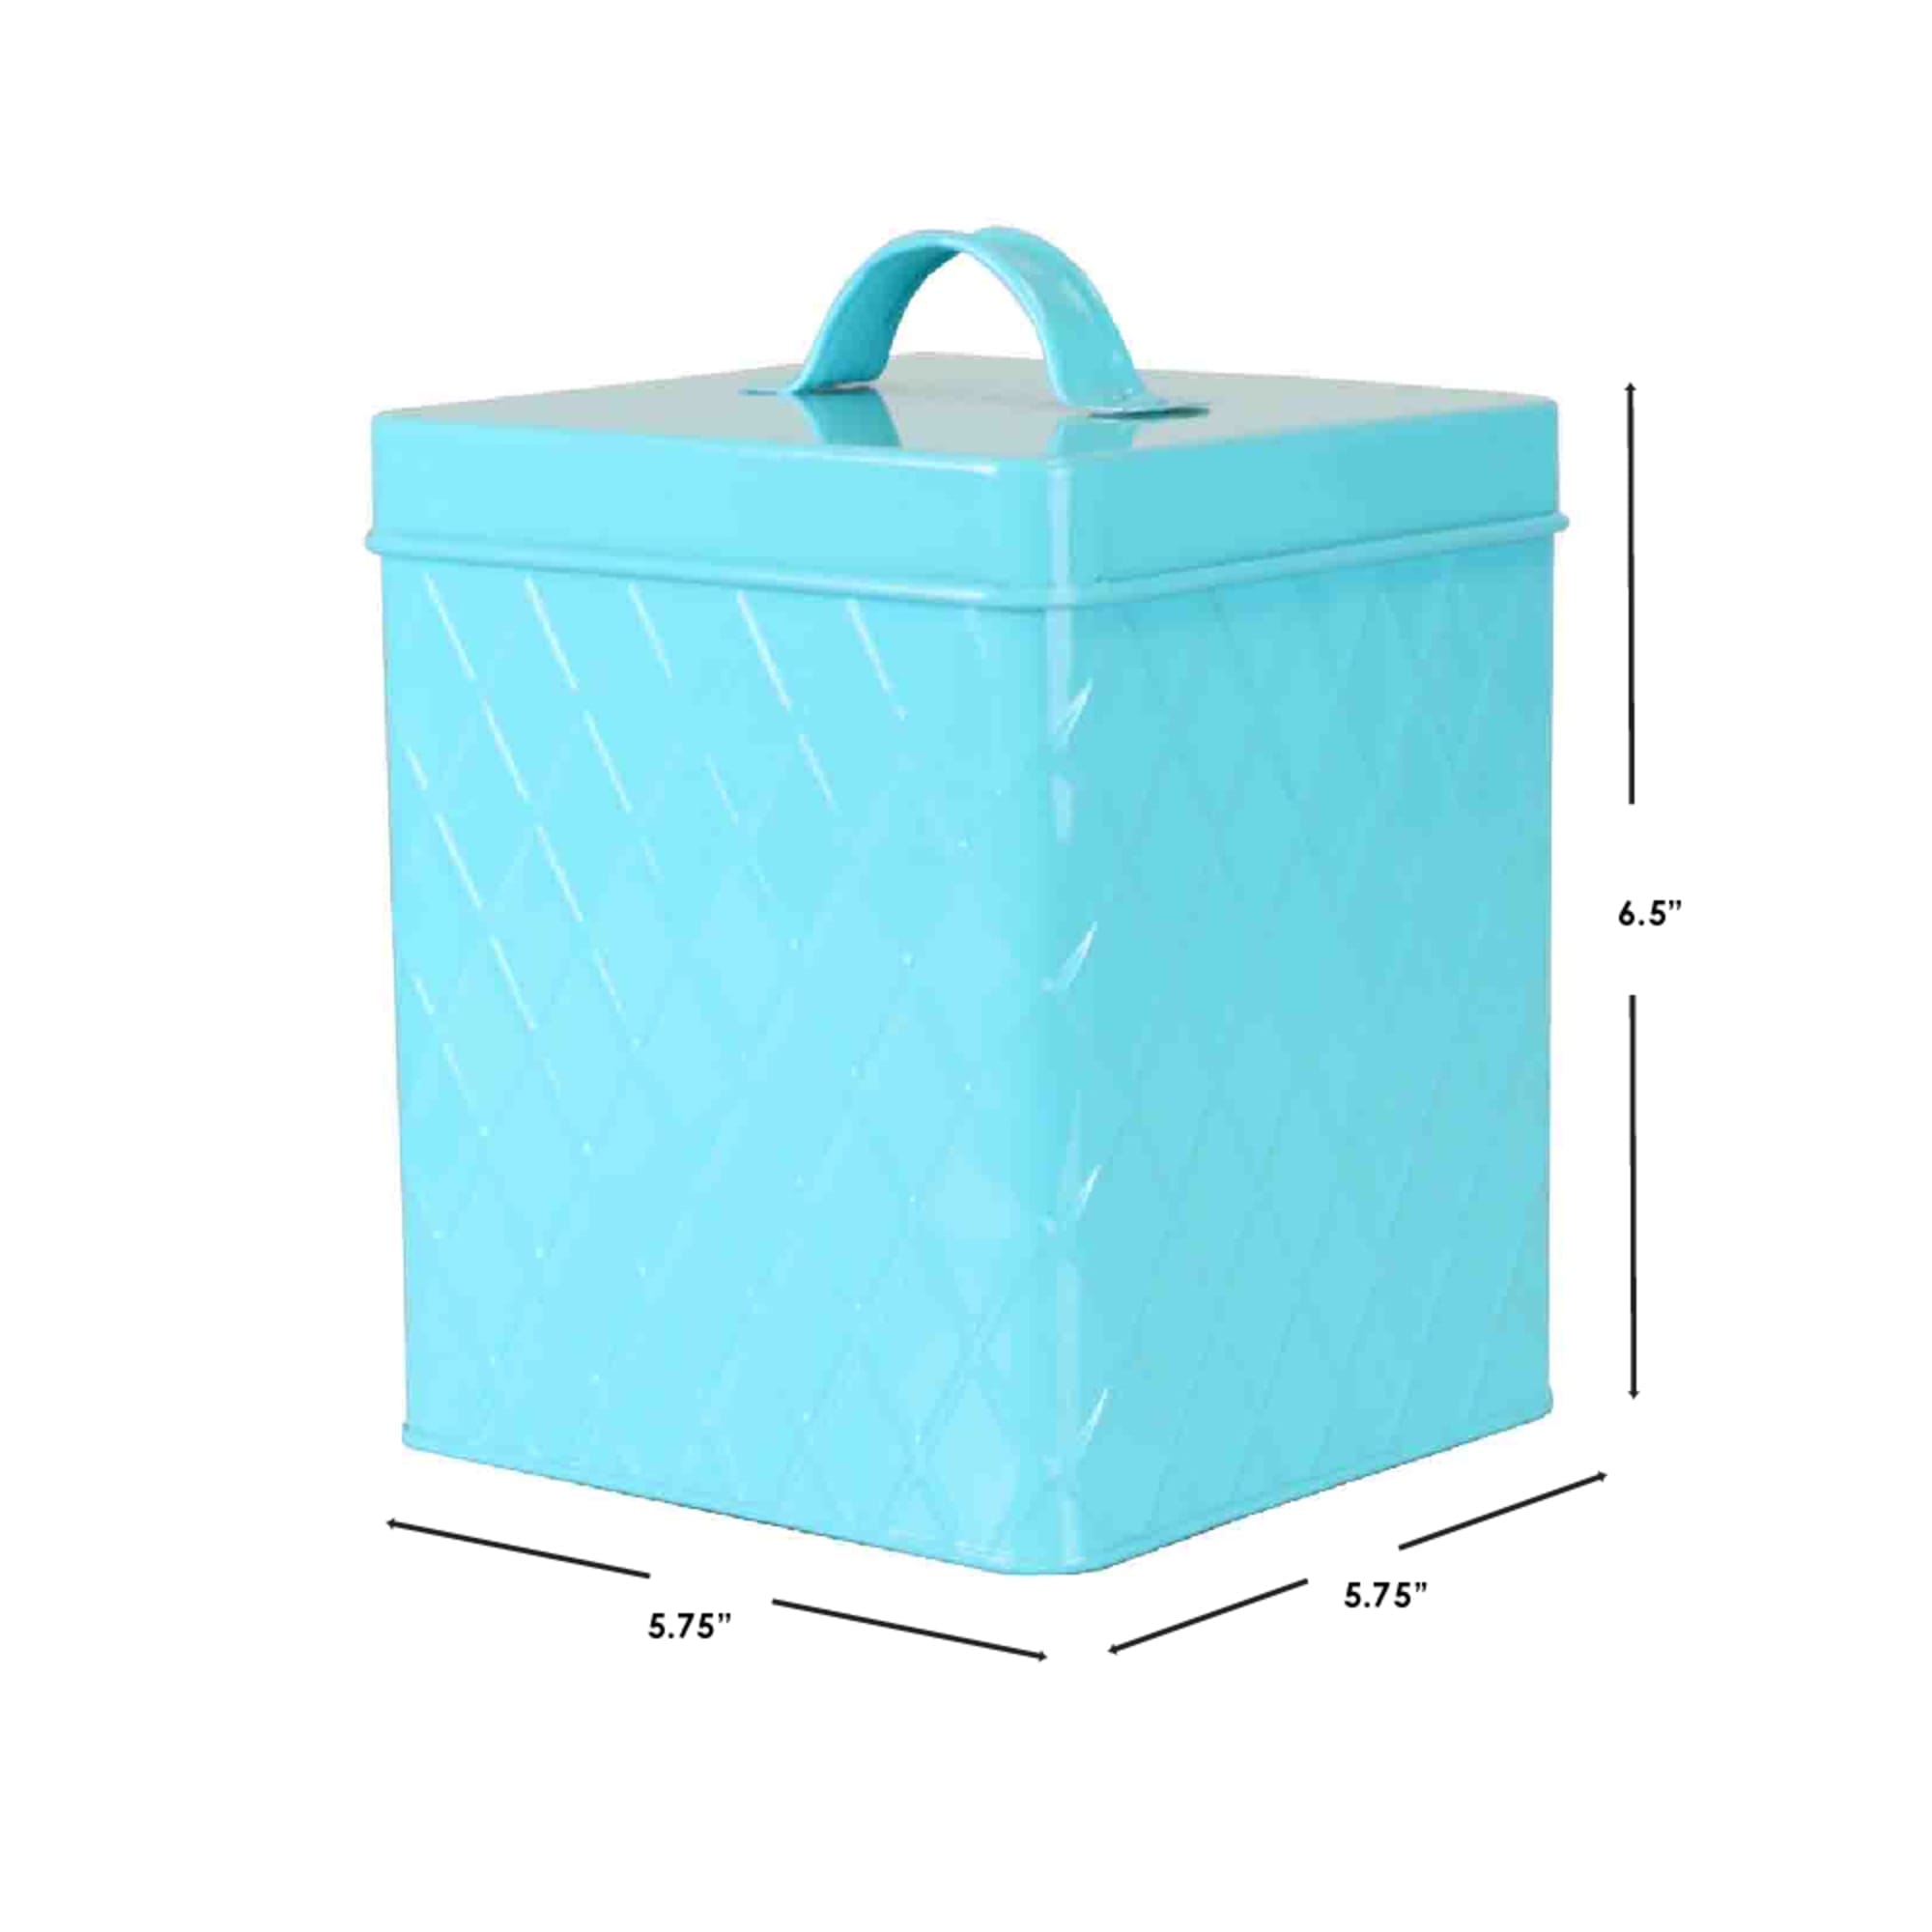 Home Basics Large  Tin Canister, Turquoise $6.00 EACH, CASE PACK OF 8